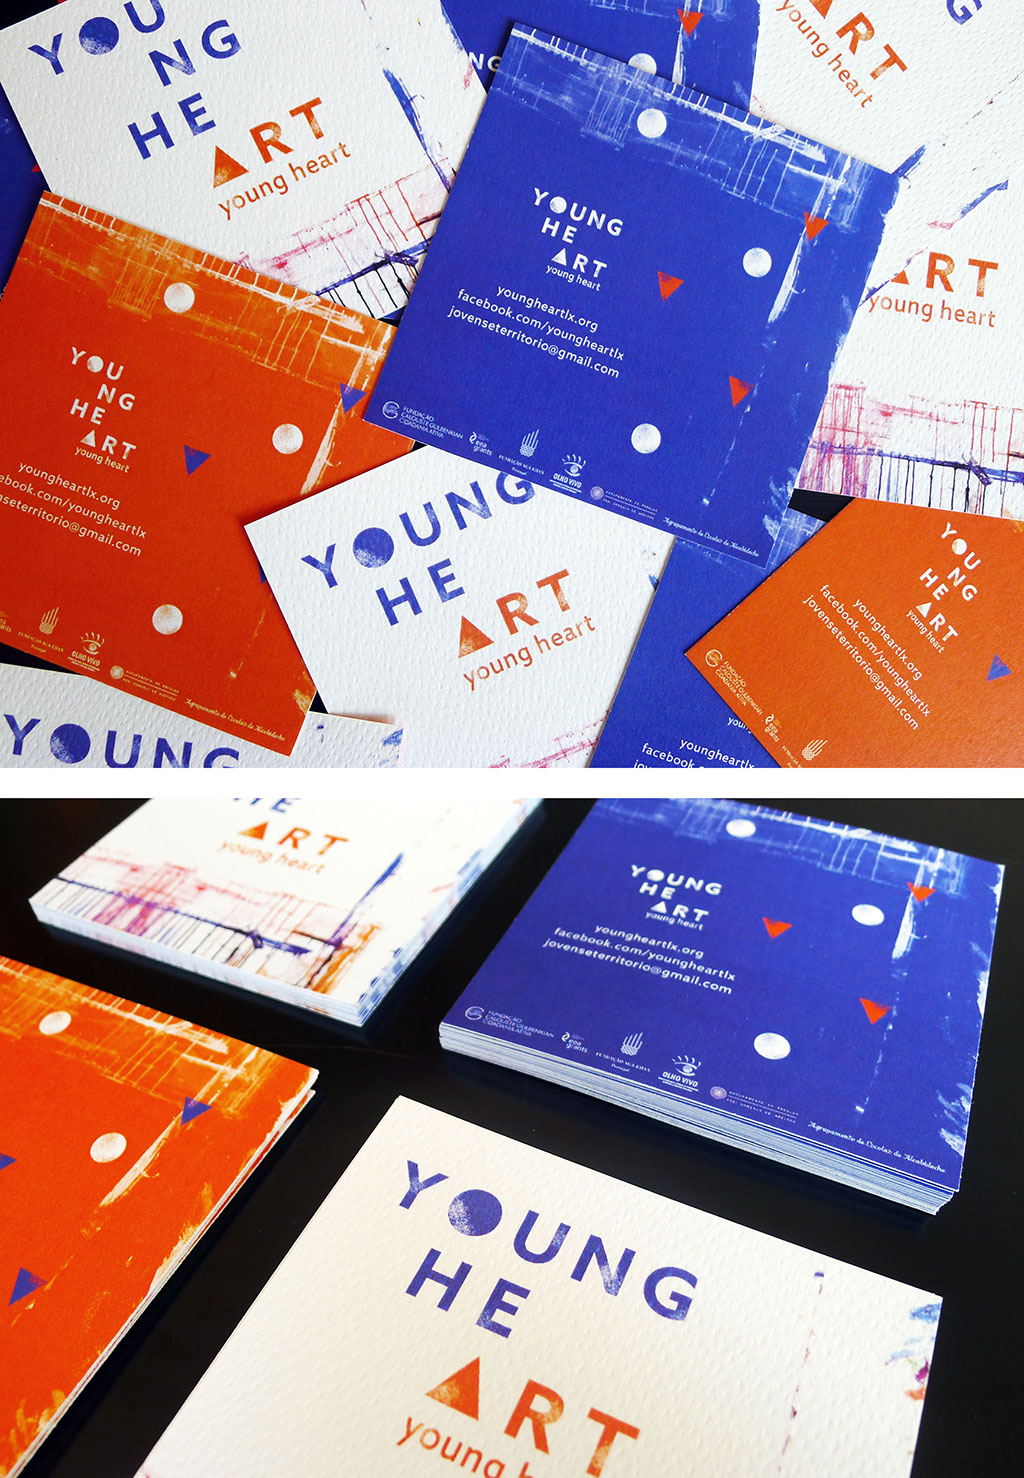 YOUNG HE-ART <br> Visual identity